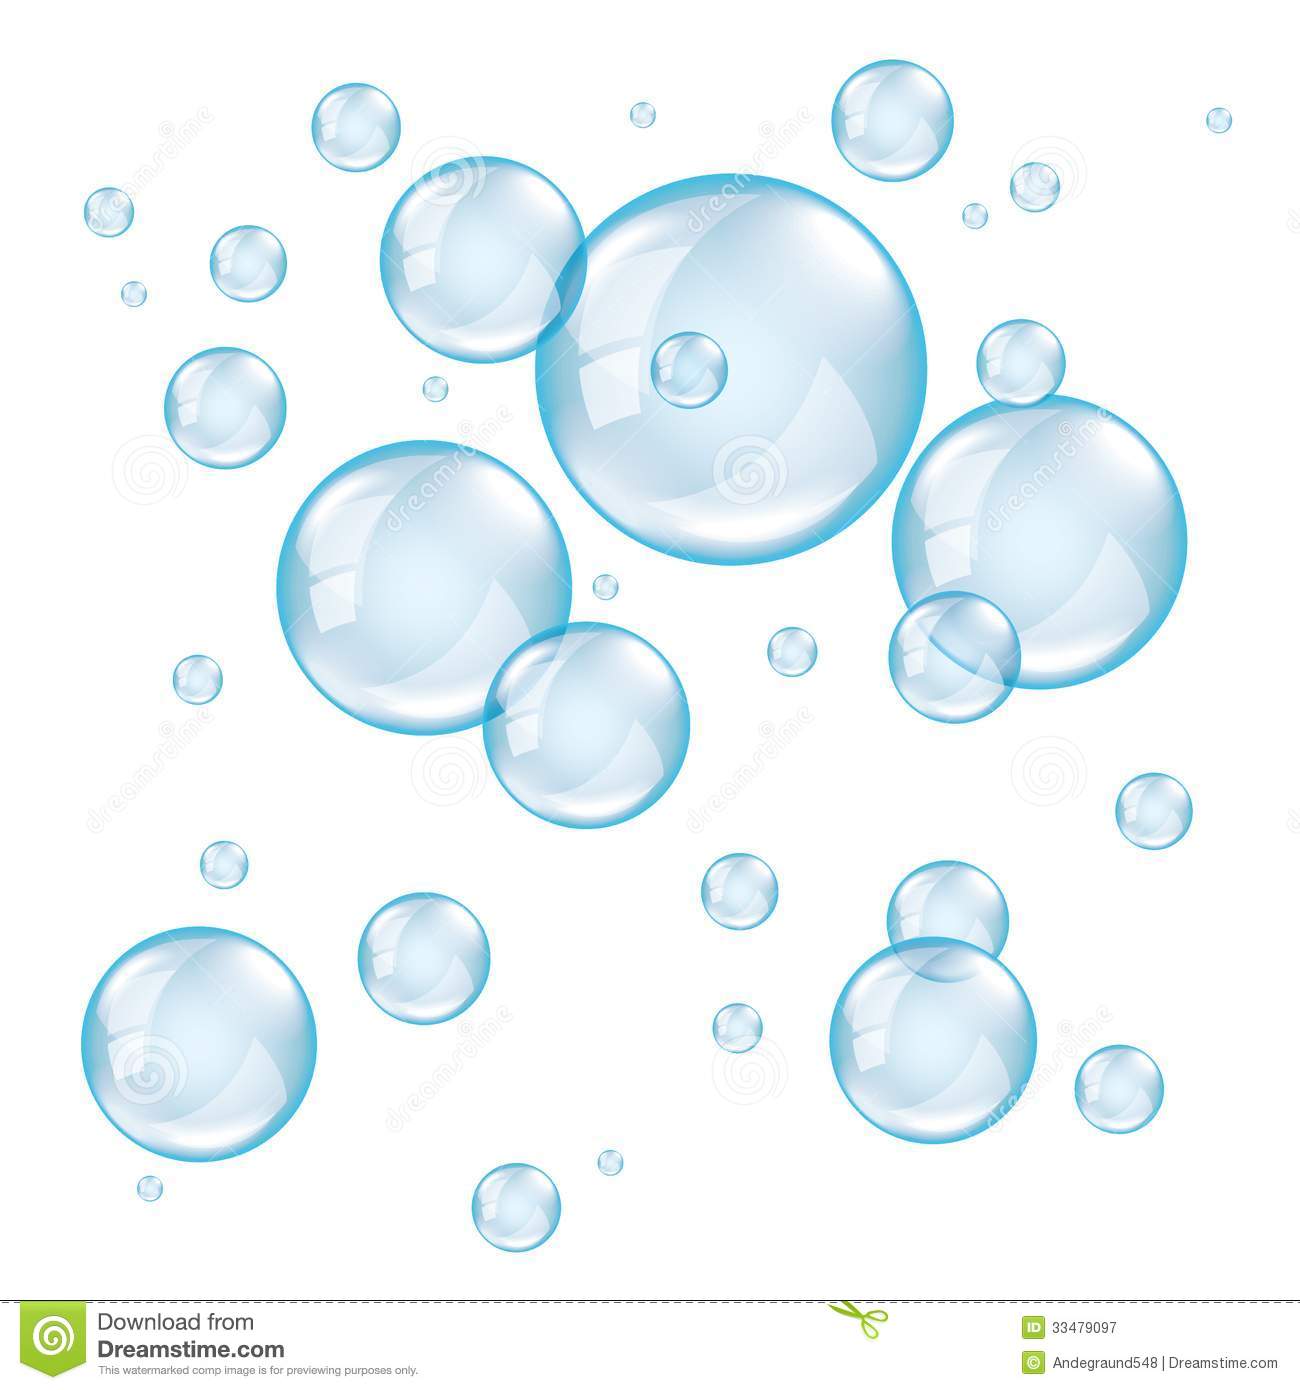 Transparent Soap Bubbles Photo Realistic Vector Royalty Free Stock